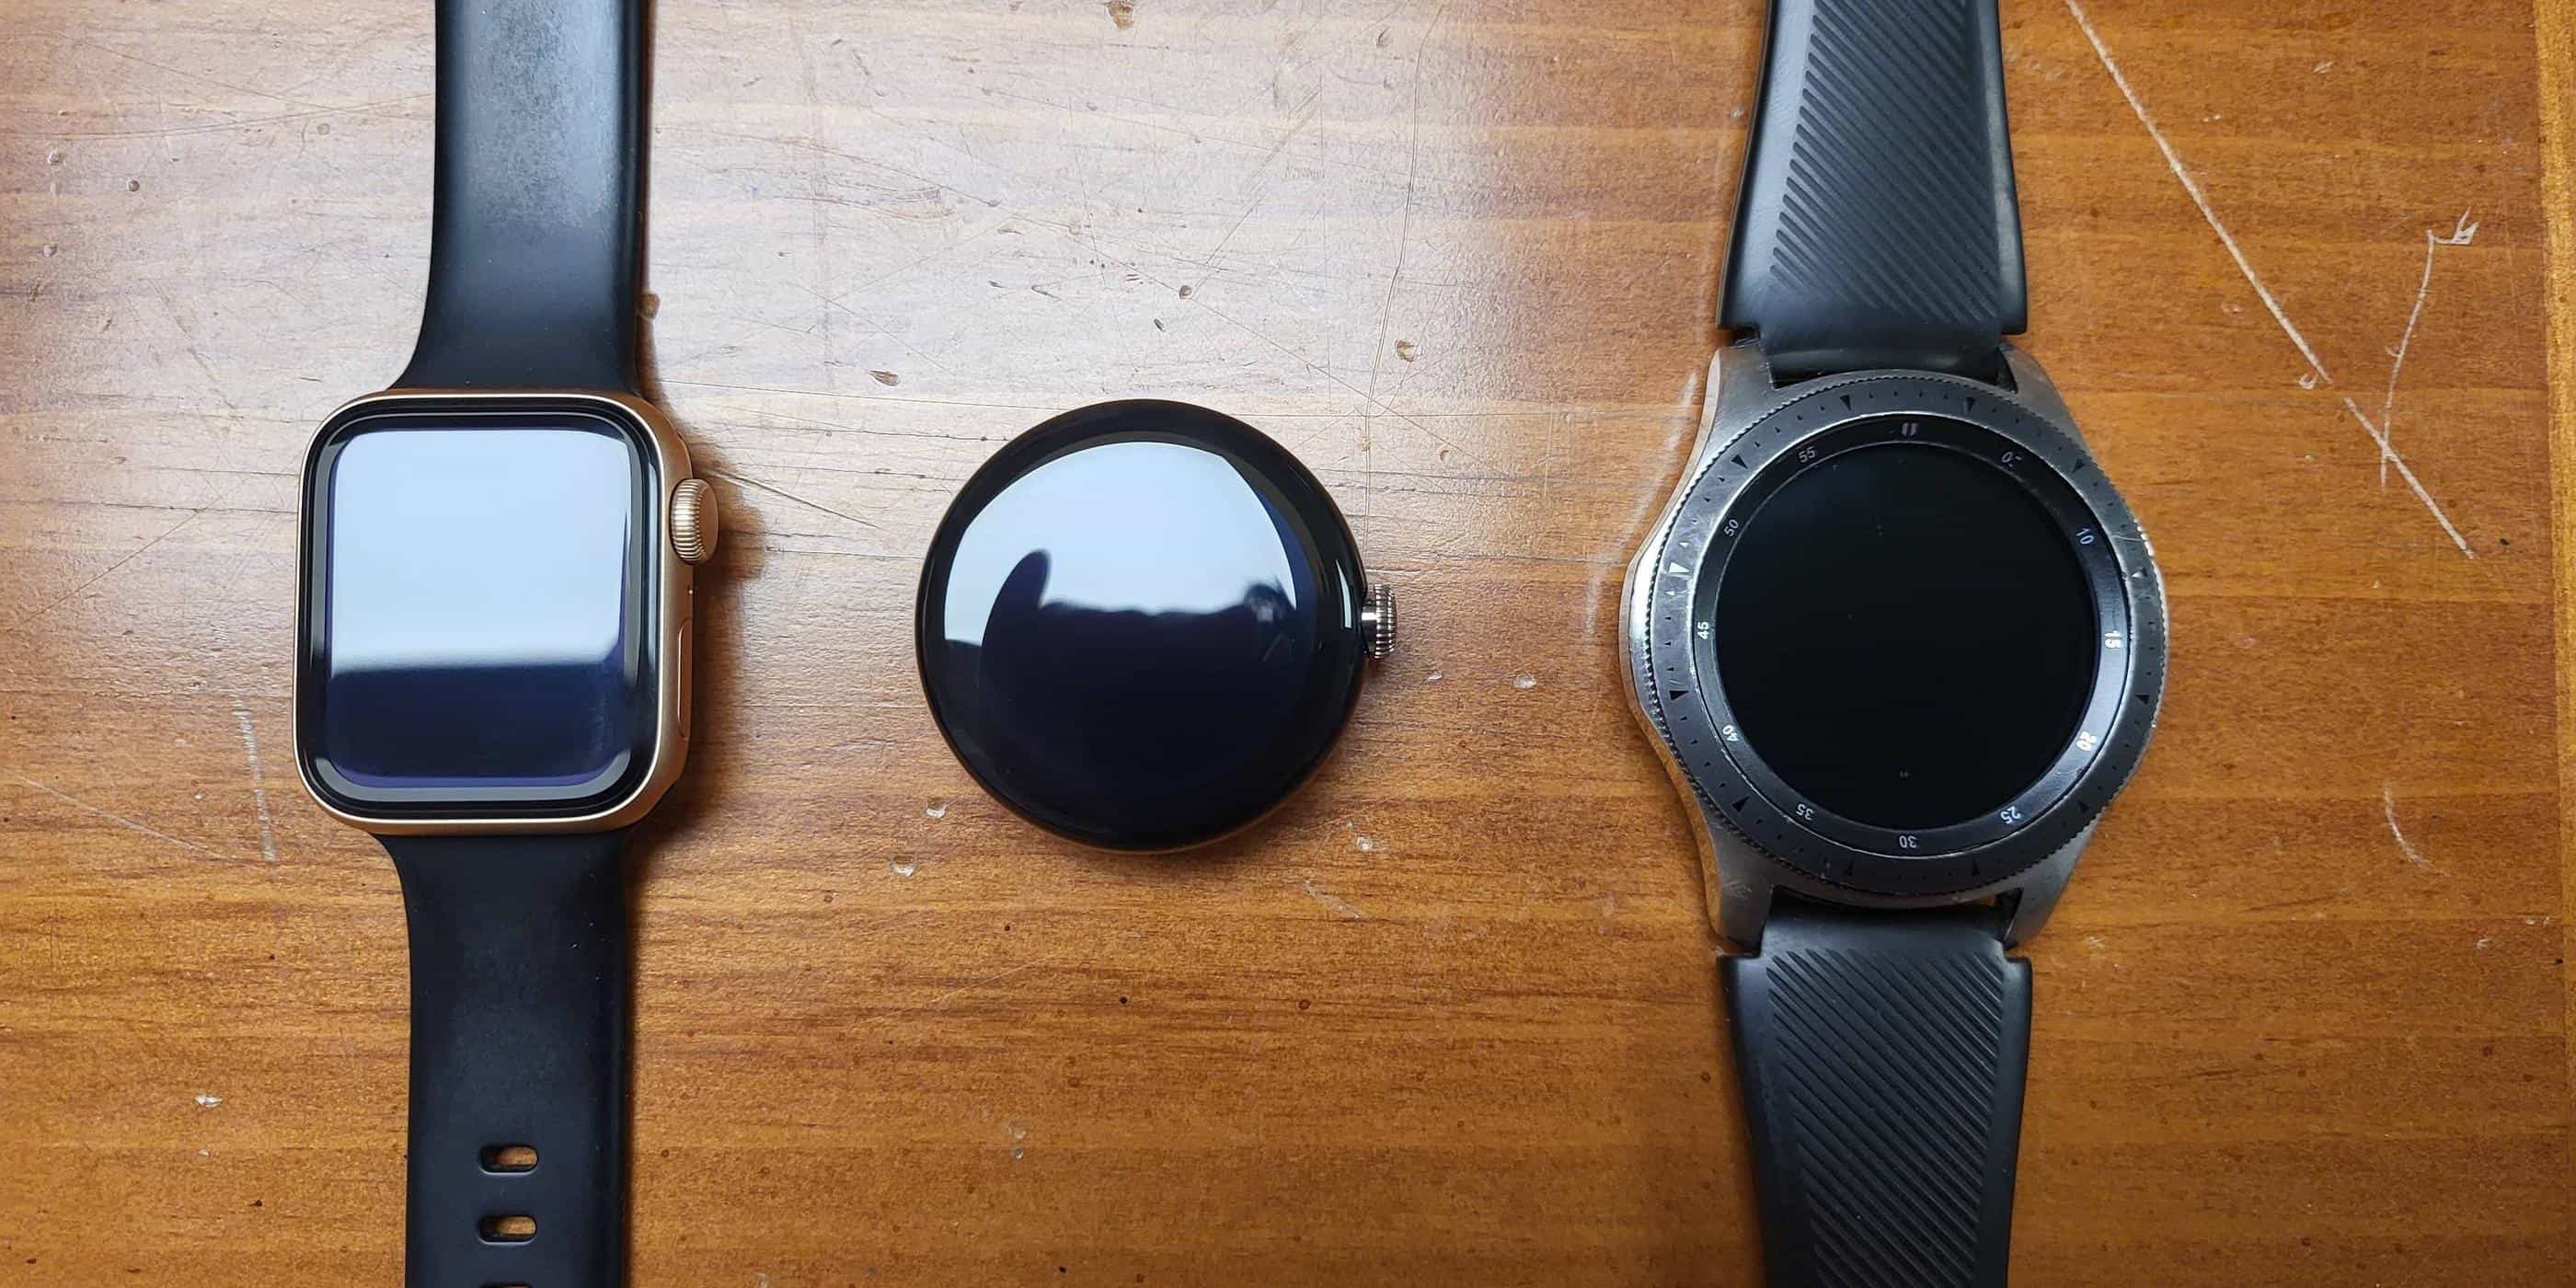 Pixel Watch leak AMA reveals 40mm size, thickness, and bezel